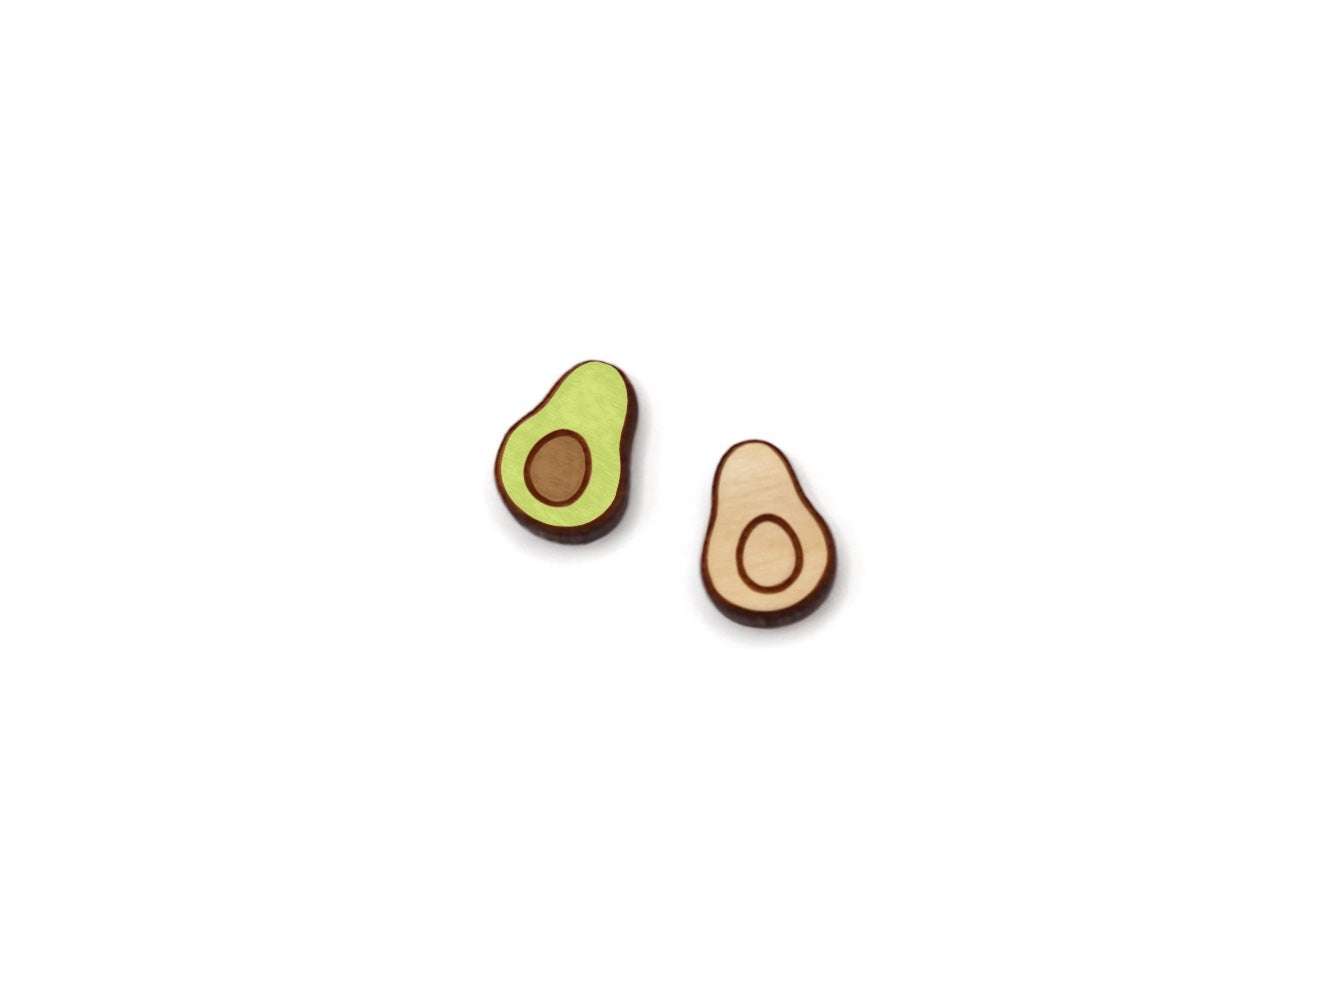 a pair of wooden cabochon stud earring blanks cut and engraved to look like an avocado